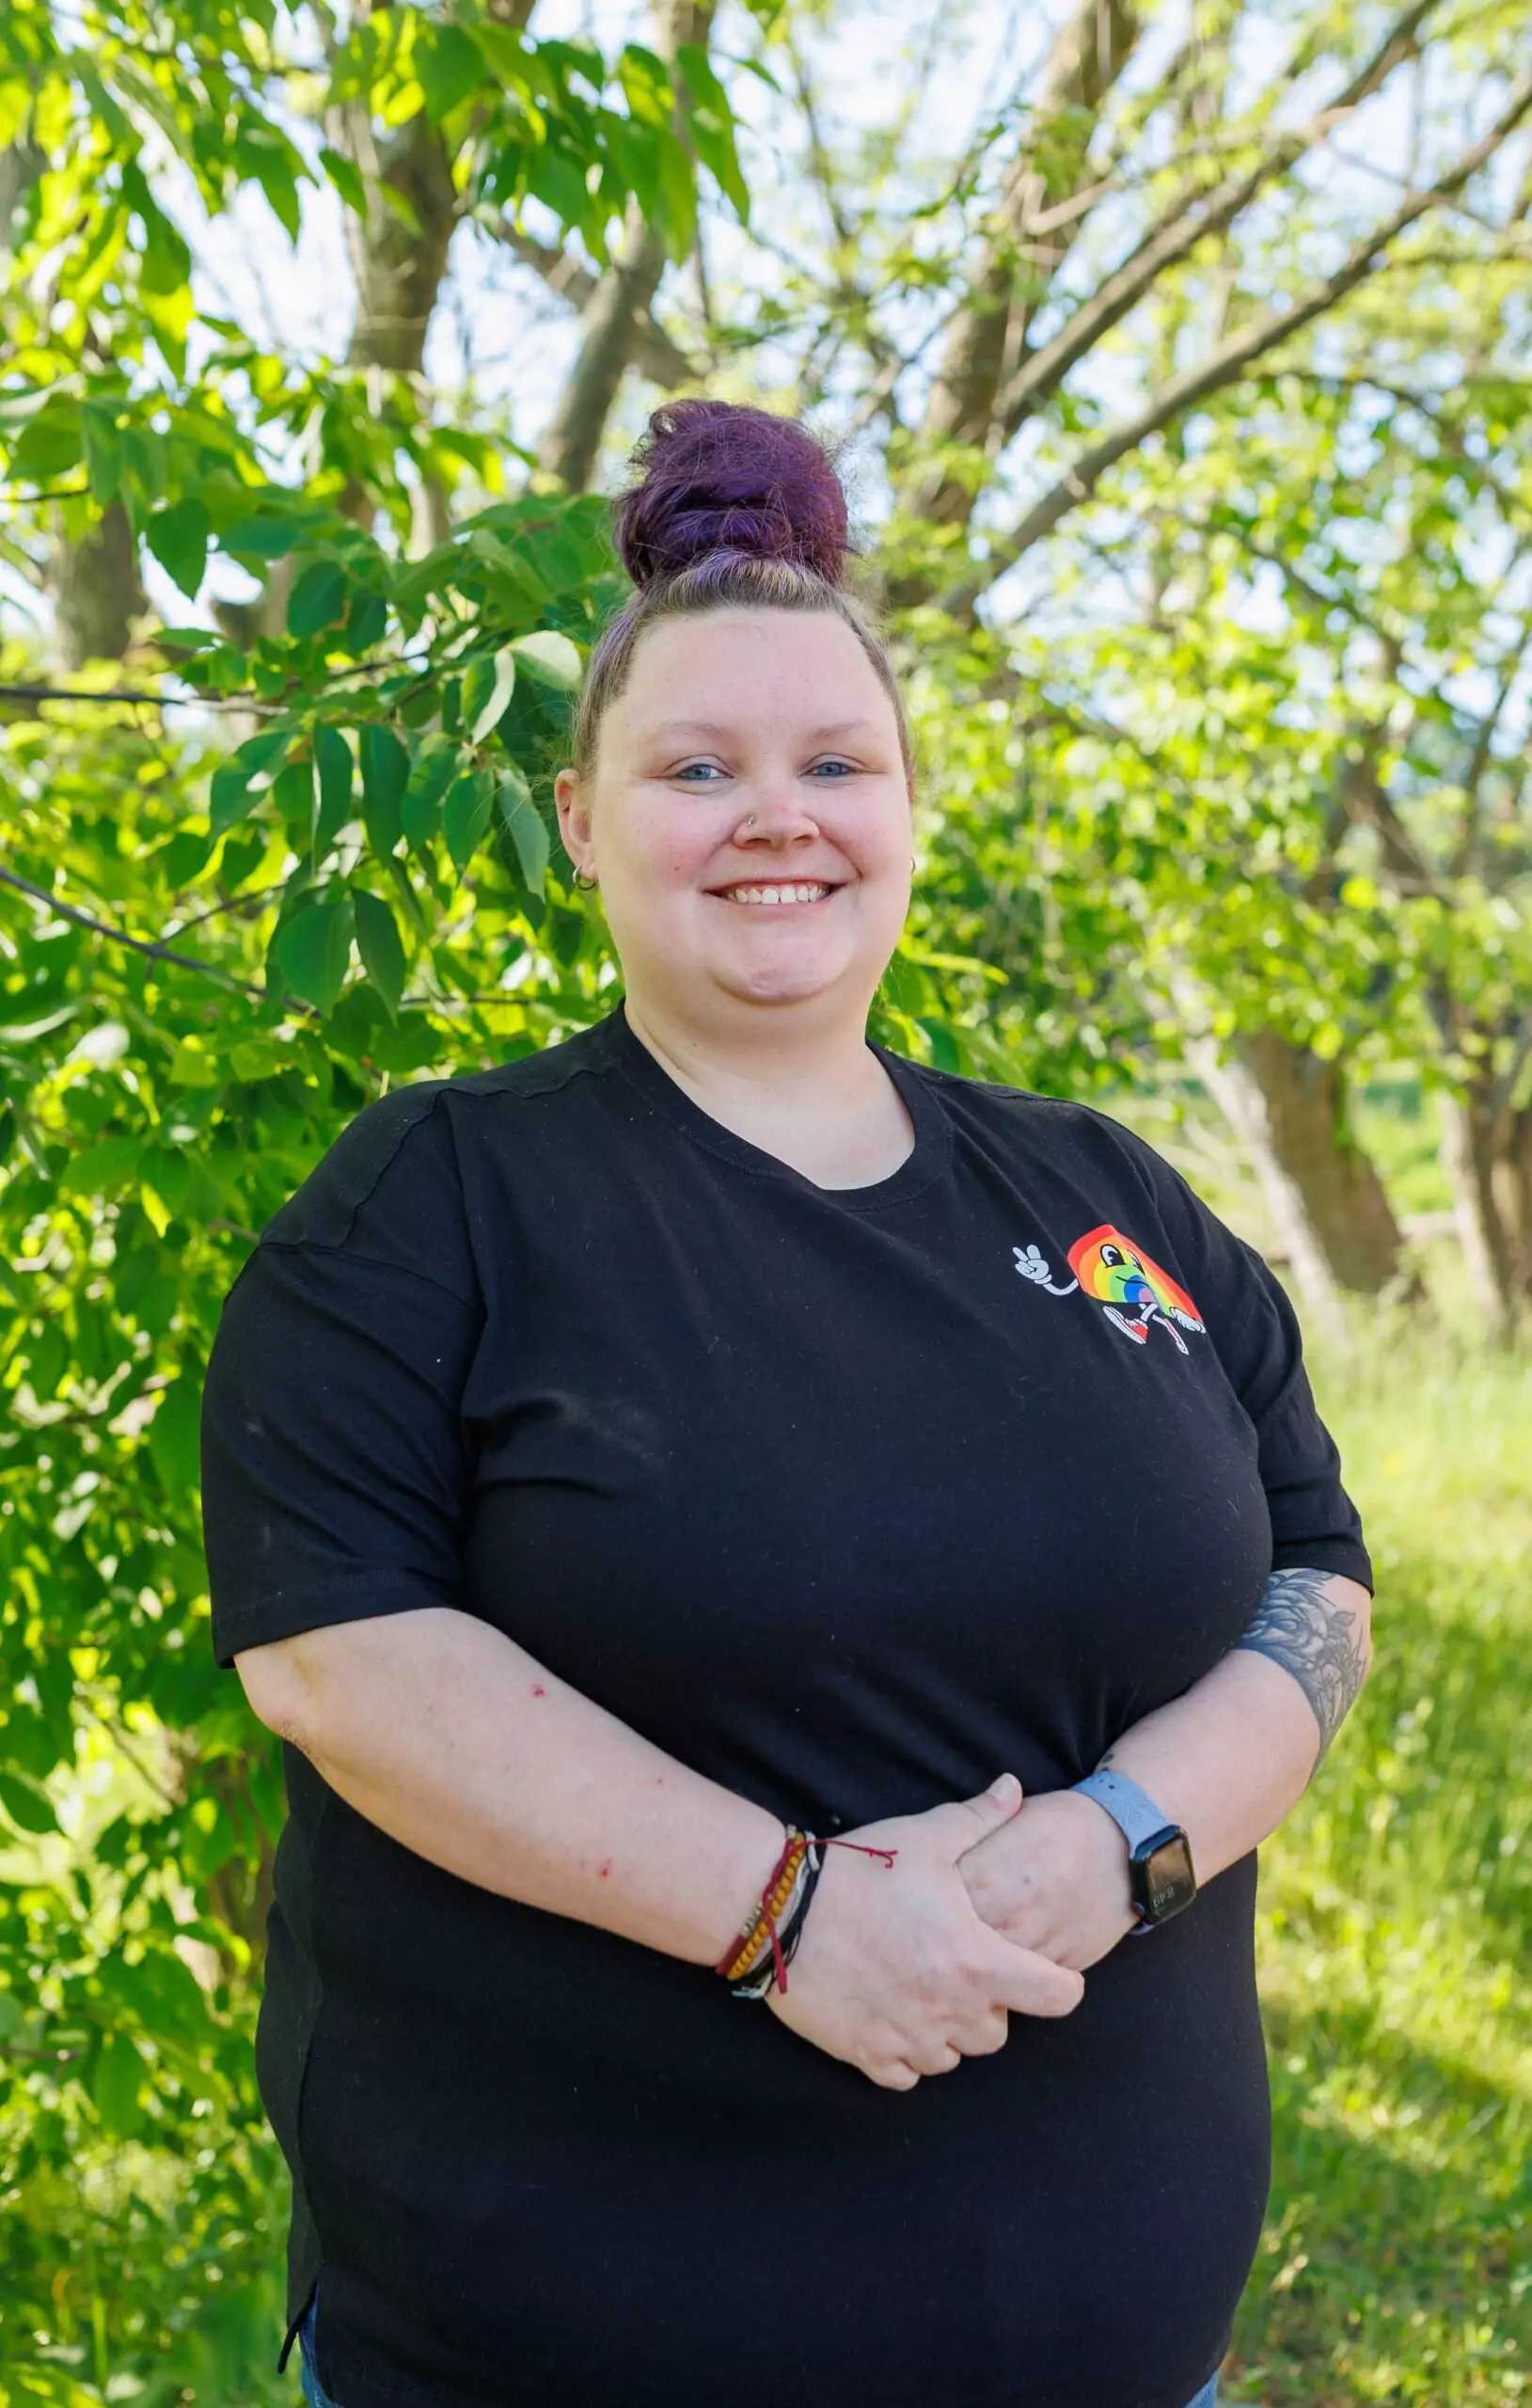 Taylour Kidd standing in front of a tree, outside. She is a white female and smiling with her hair up in a bun. She is wearing a short-sleeve black shirt with a animated rainbow giving a thumbs up on the left-chest.